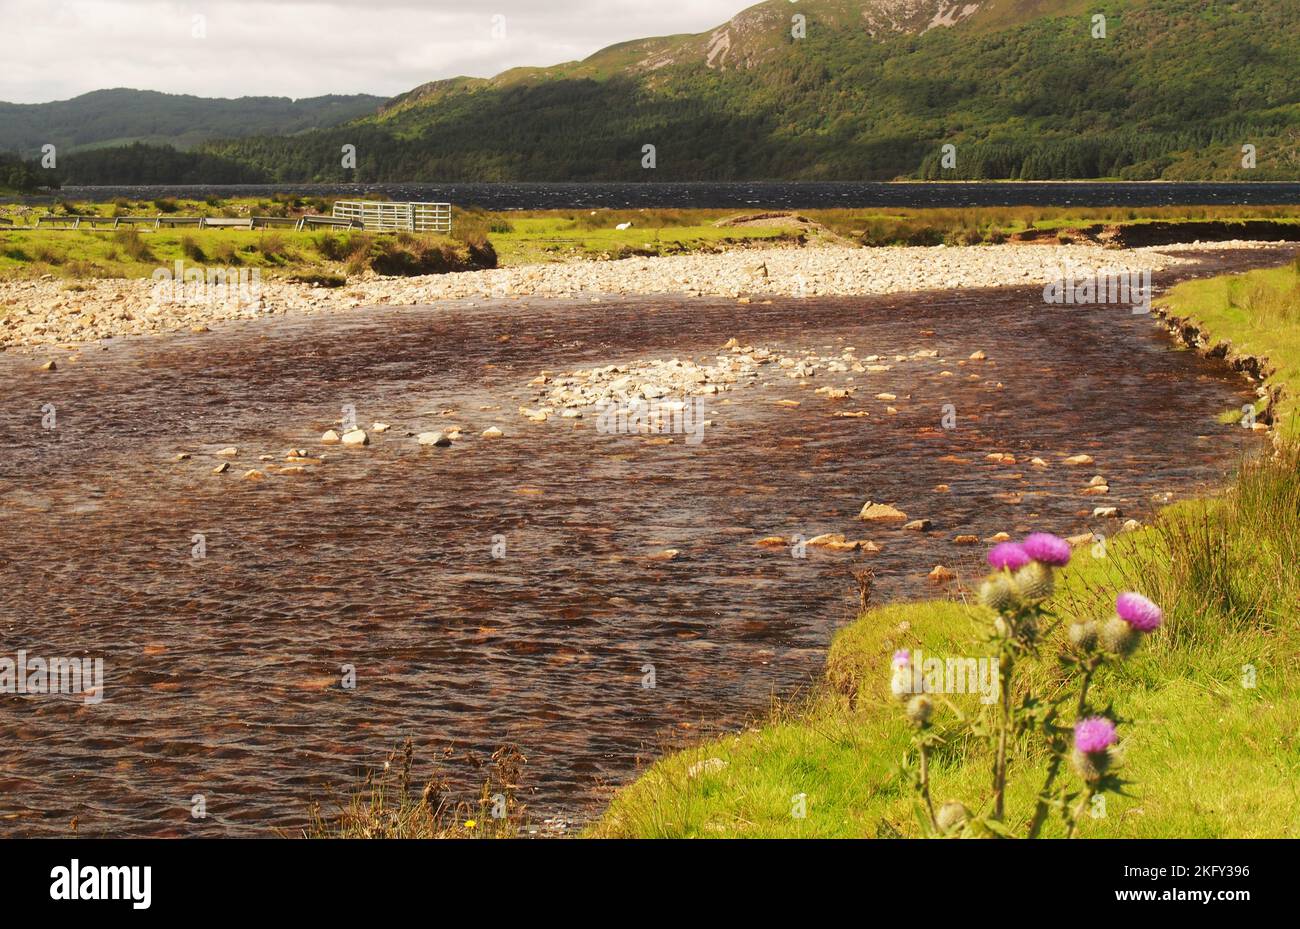 A view at the south east end of Loch Ba, Mull, Scotland showing the rocky, stony river and wild, remote landscape Stock Photo